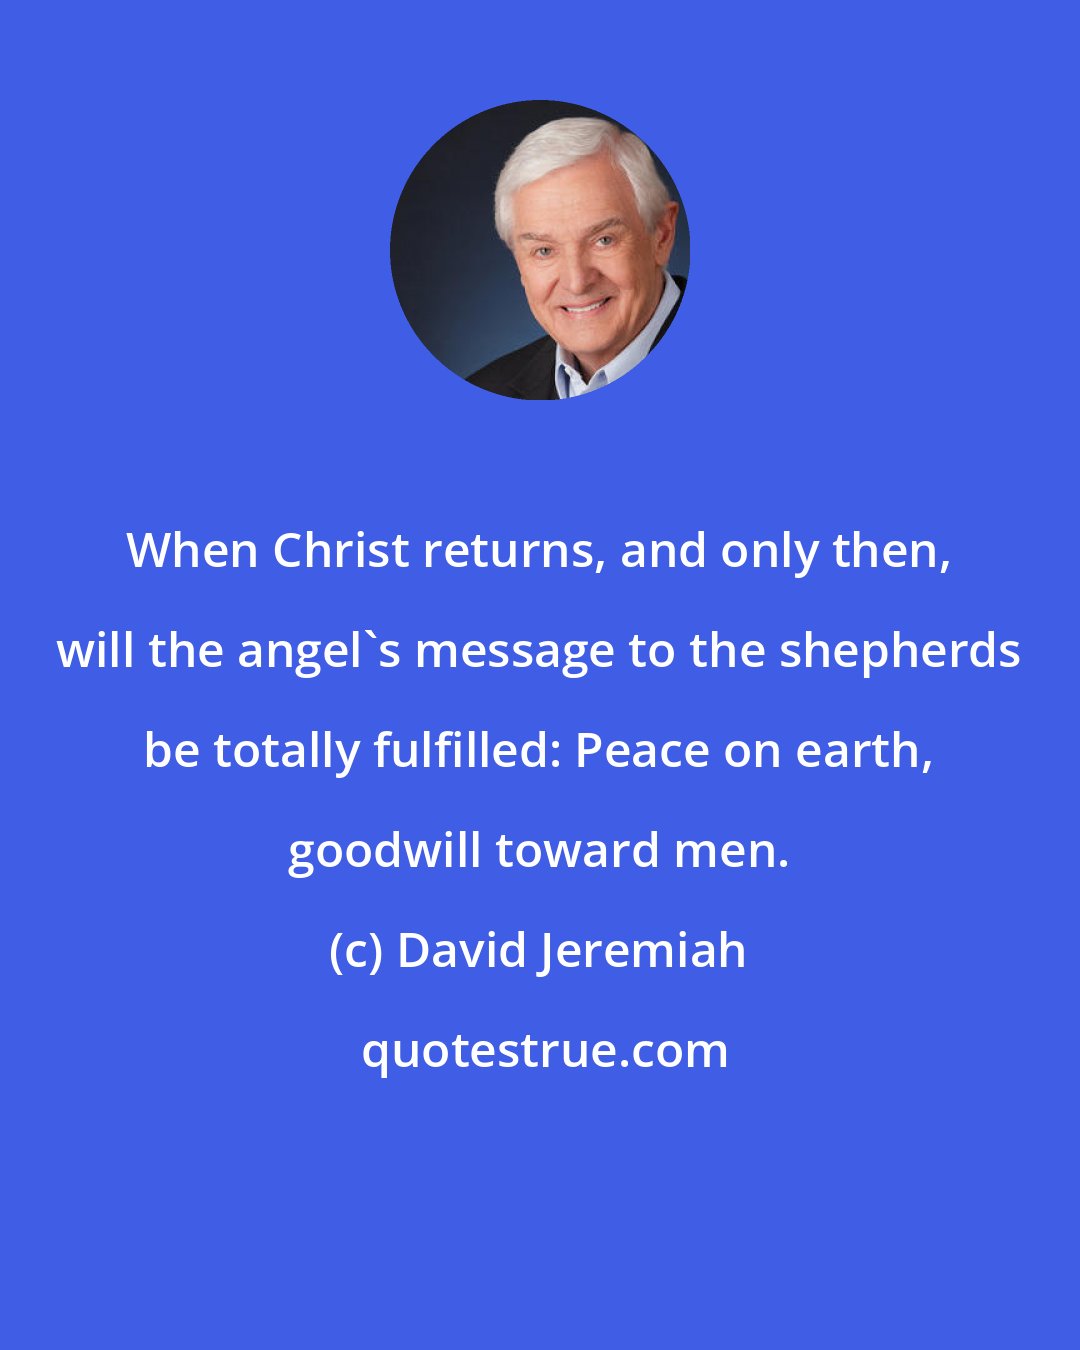 David Jeremiah: When Christ returns, and only then, will the angel's message to the shepherds be totally fulfilled: Peace on earth, goodwill toward men.